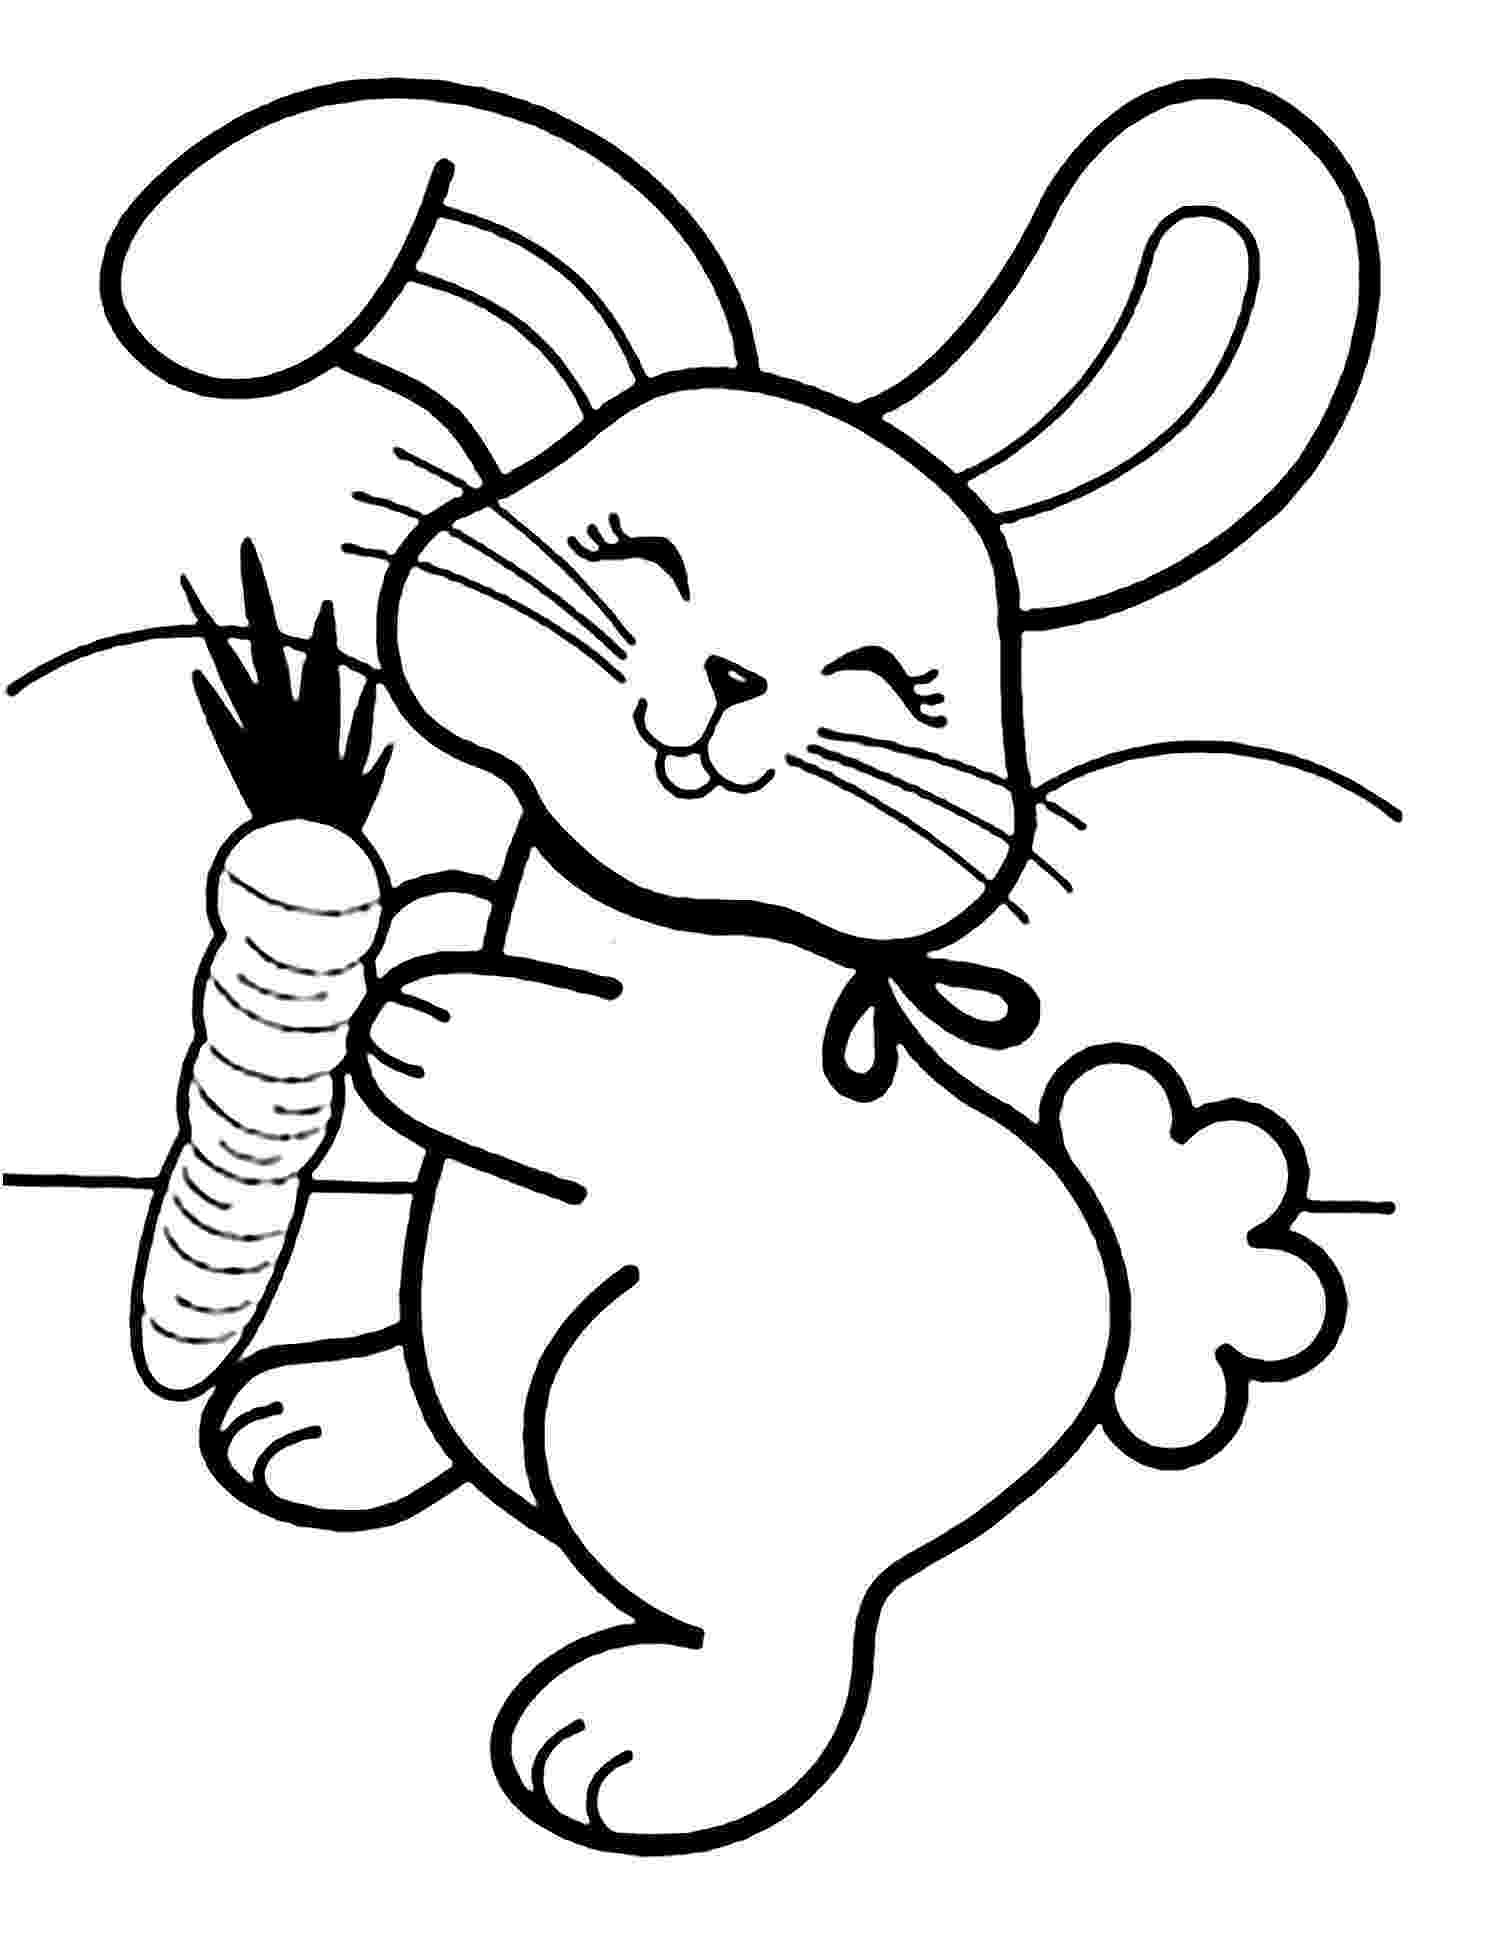 bunny color page bunny coloring pages best coloring pages for kids bunny page color 1 1